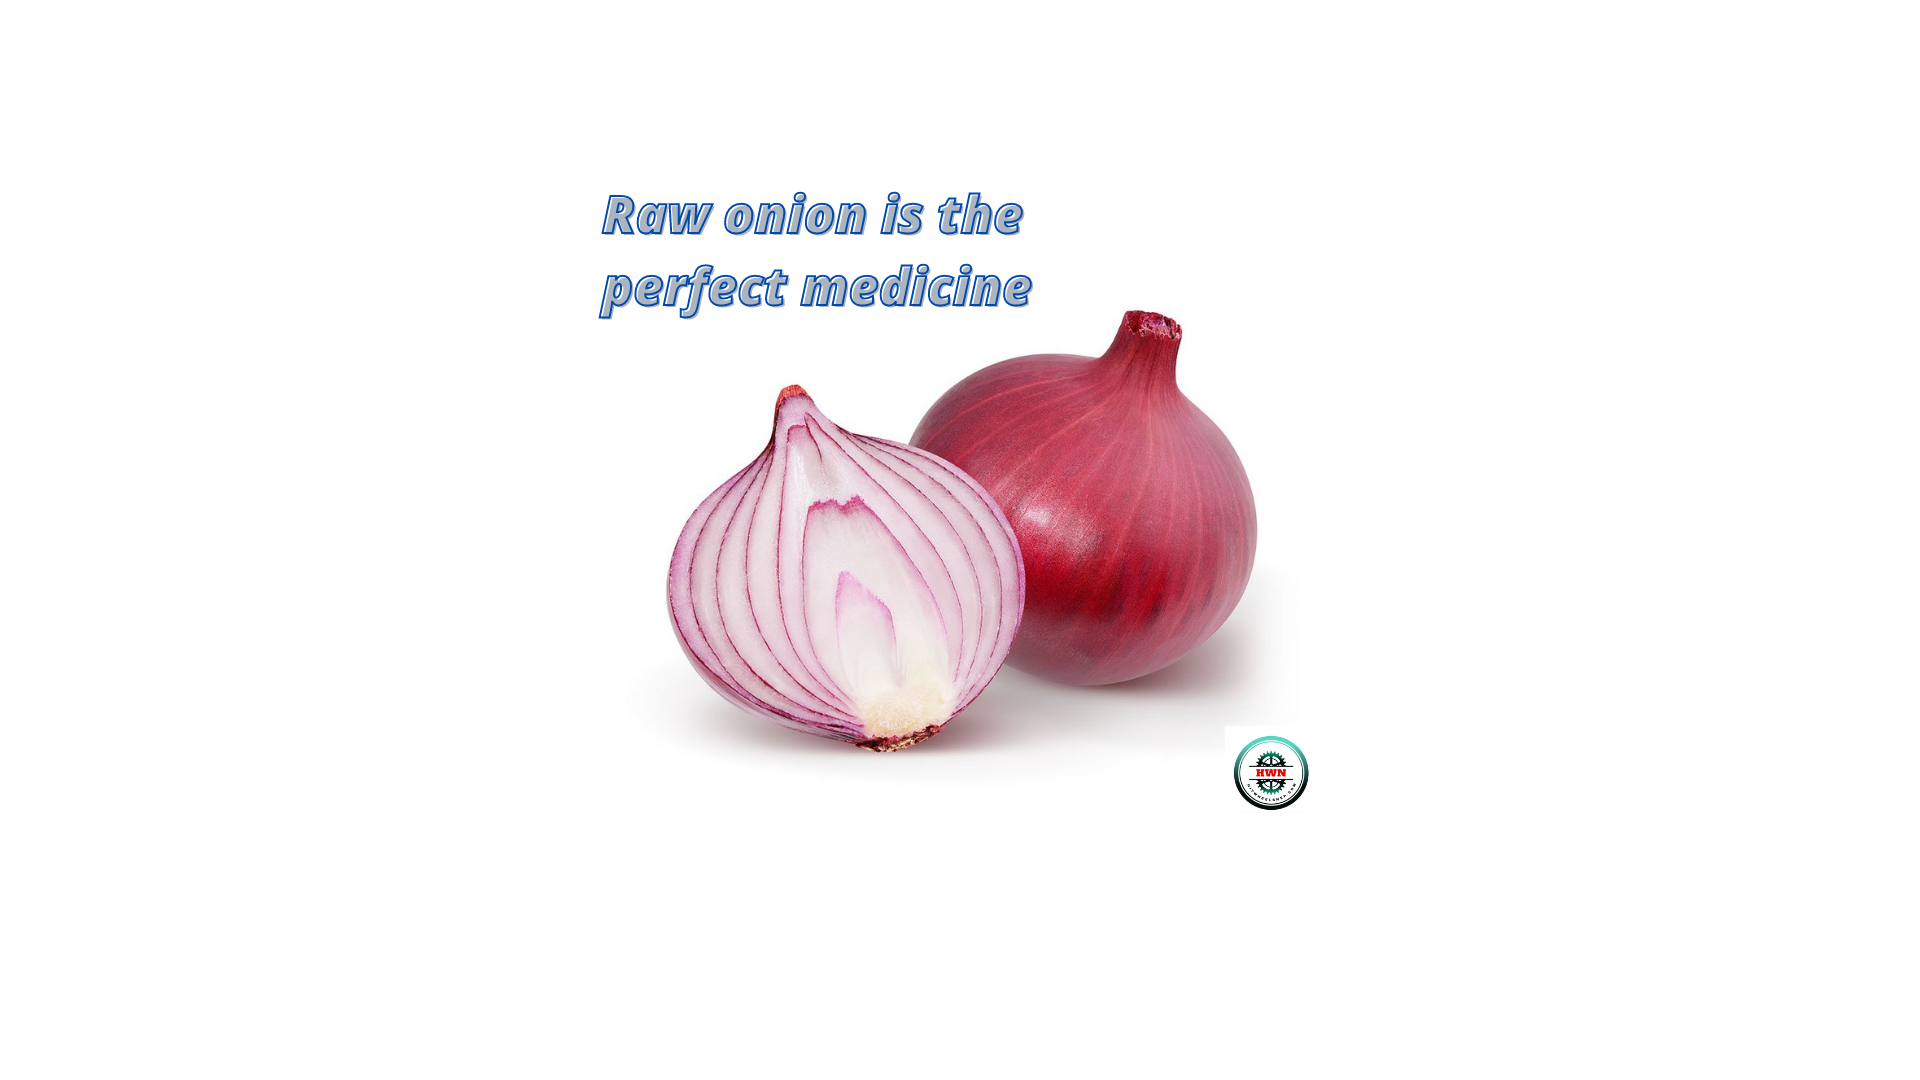 Raw onion is the perfect medicine